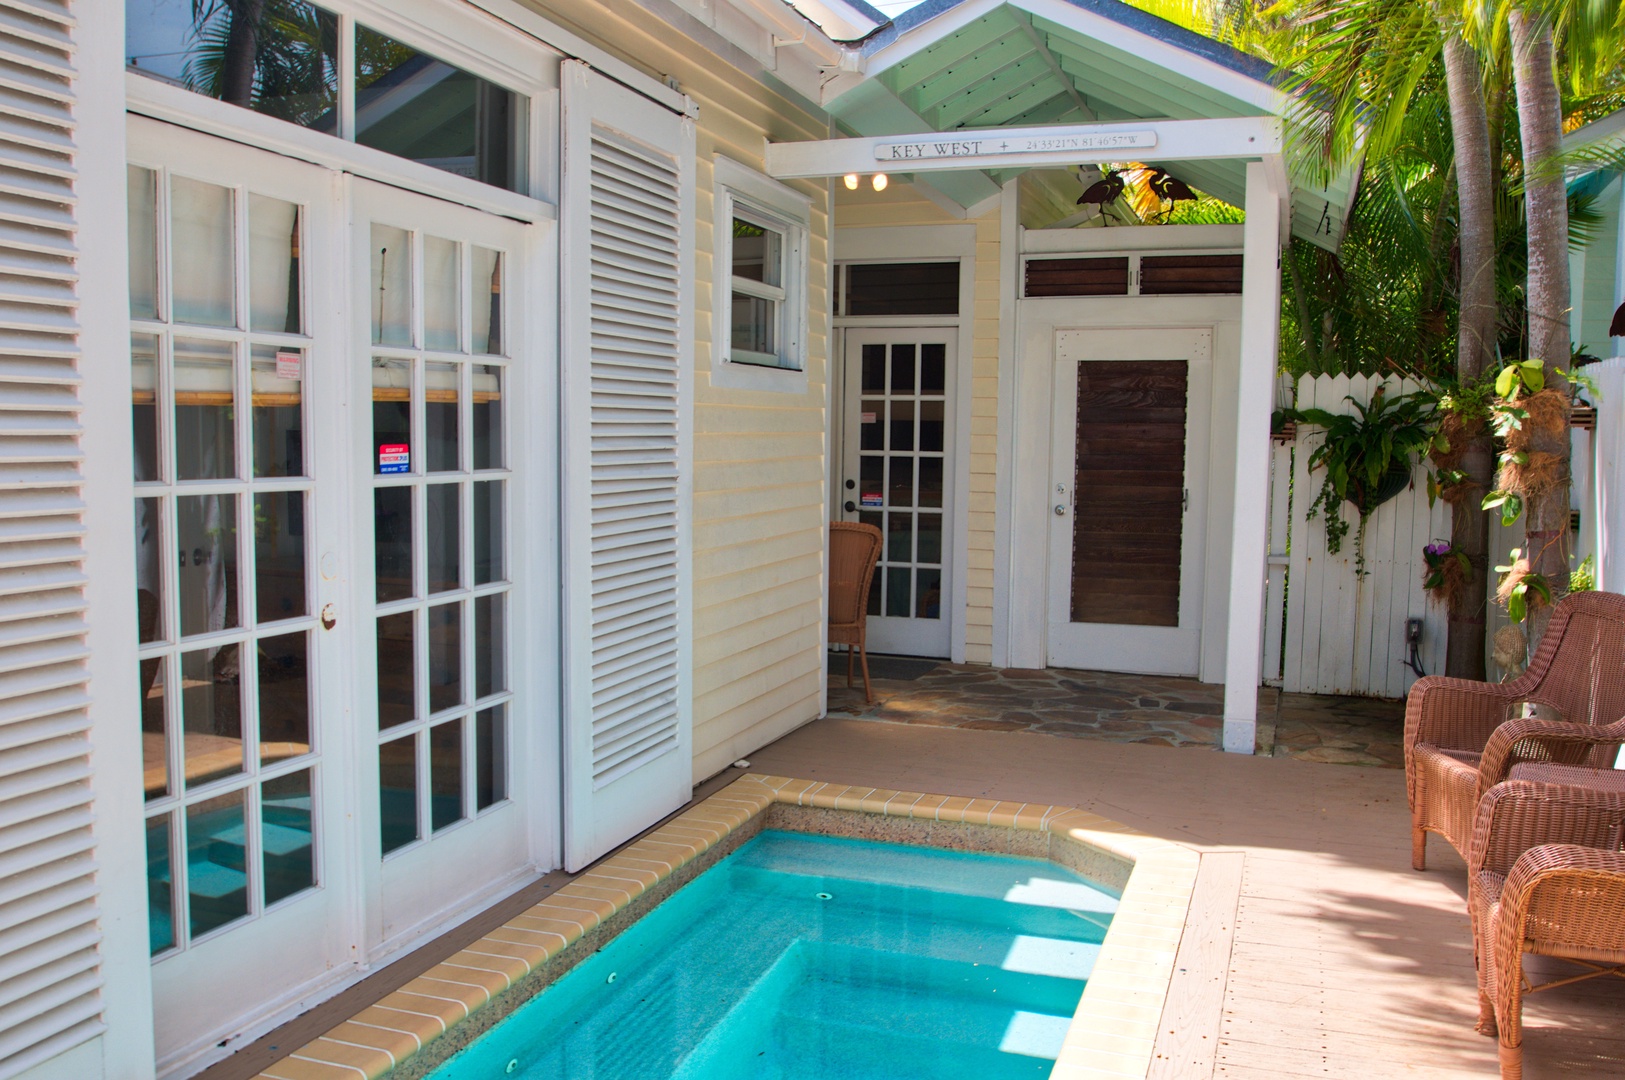 Private Pool and Patio Catherine House Key West